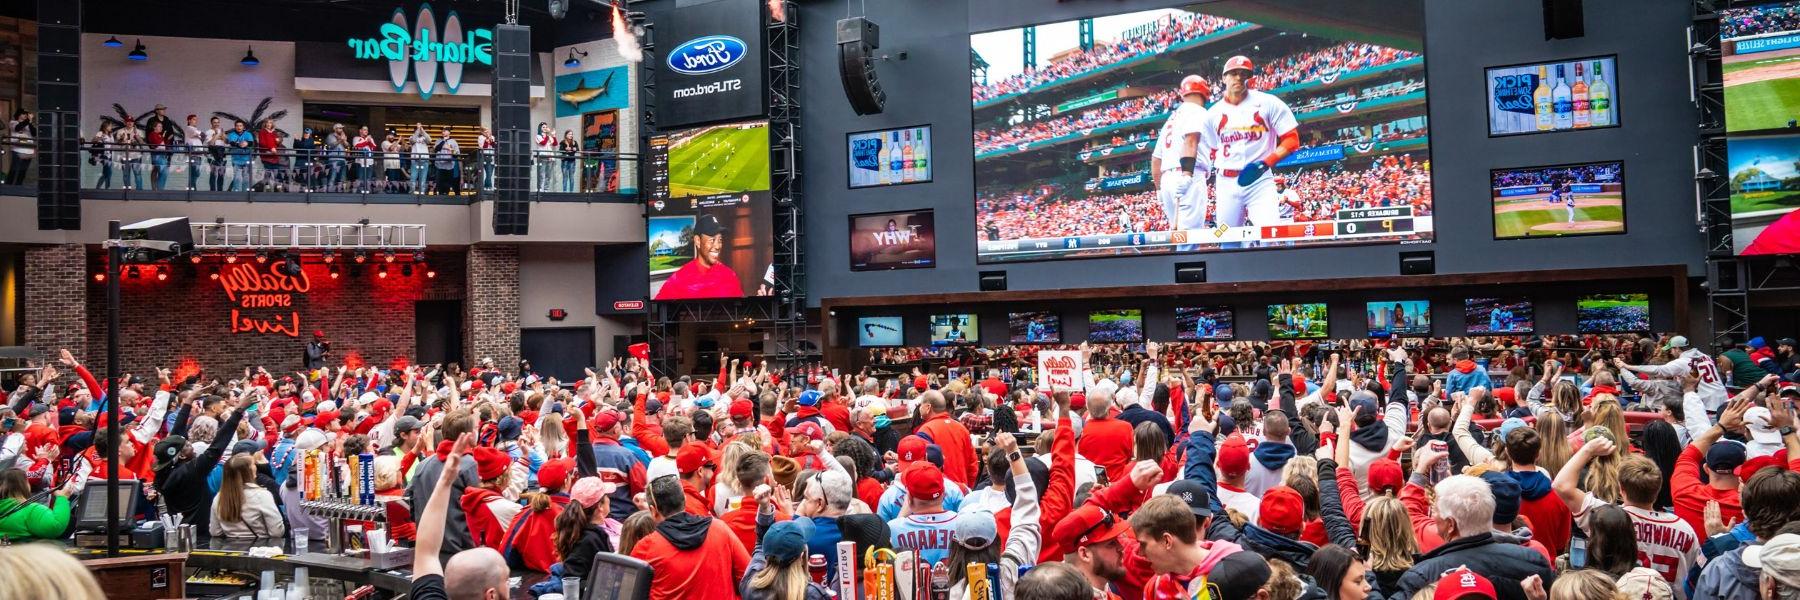 Cardinals fans watch the game on the gigantic screen at Ballpark Village.